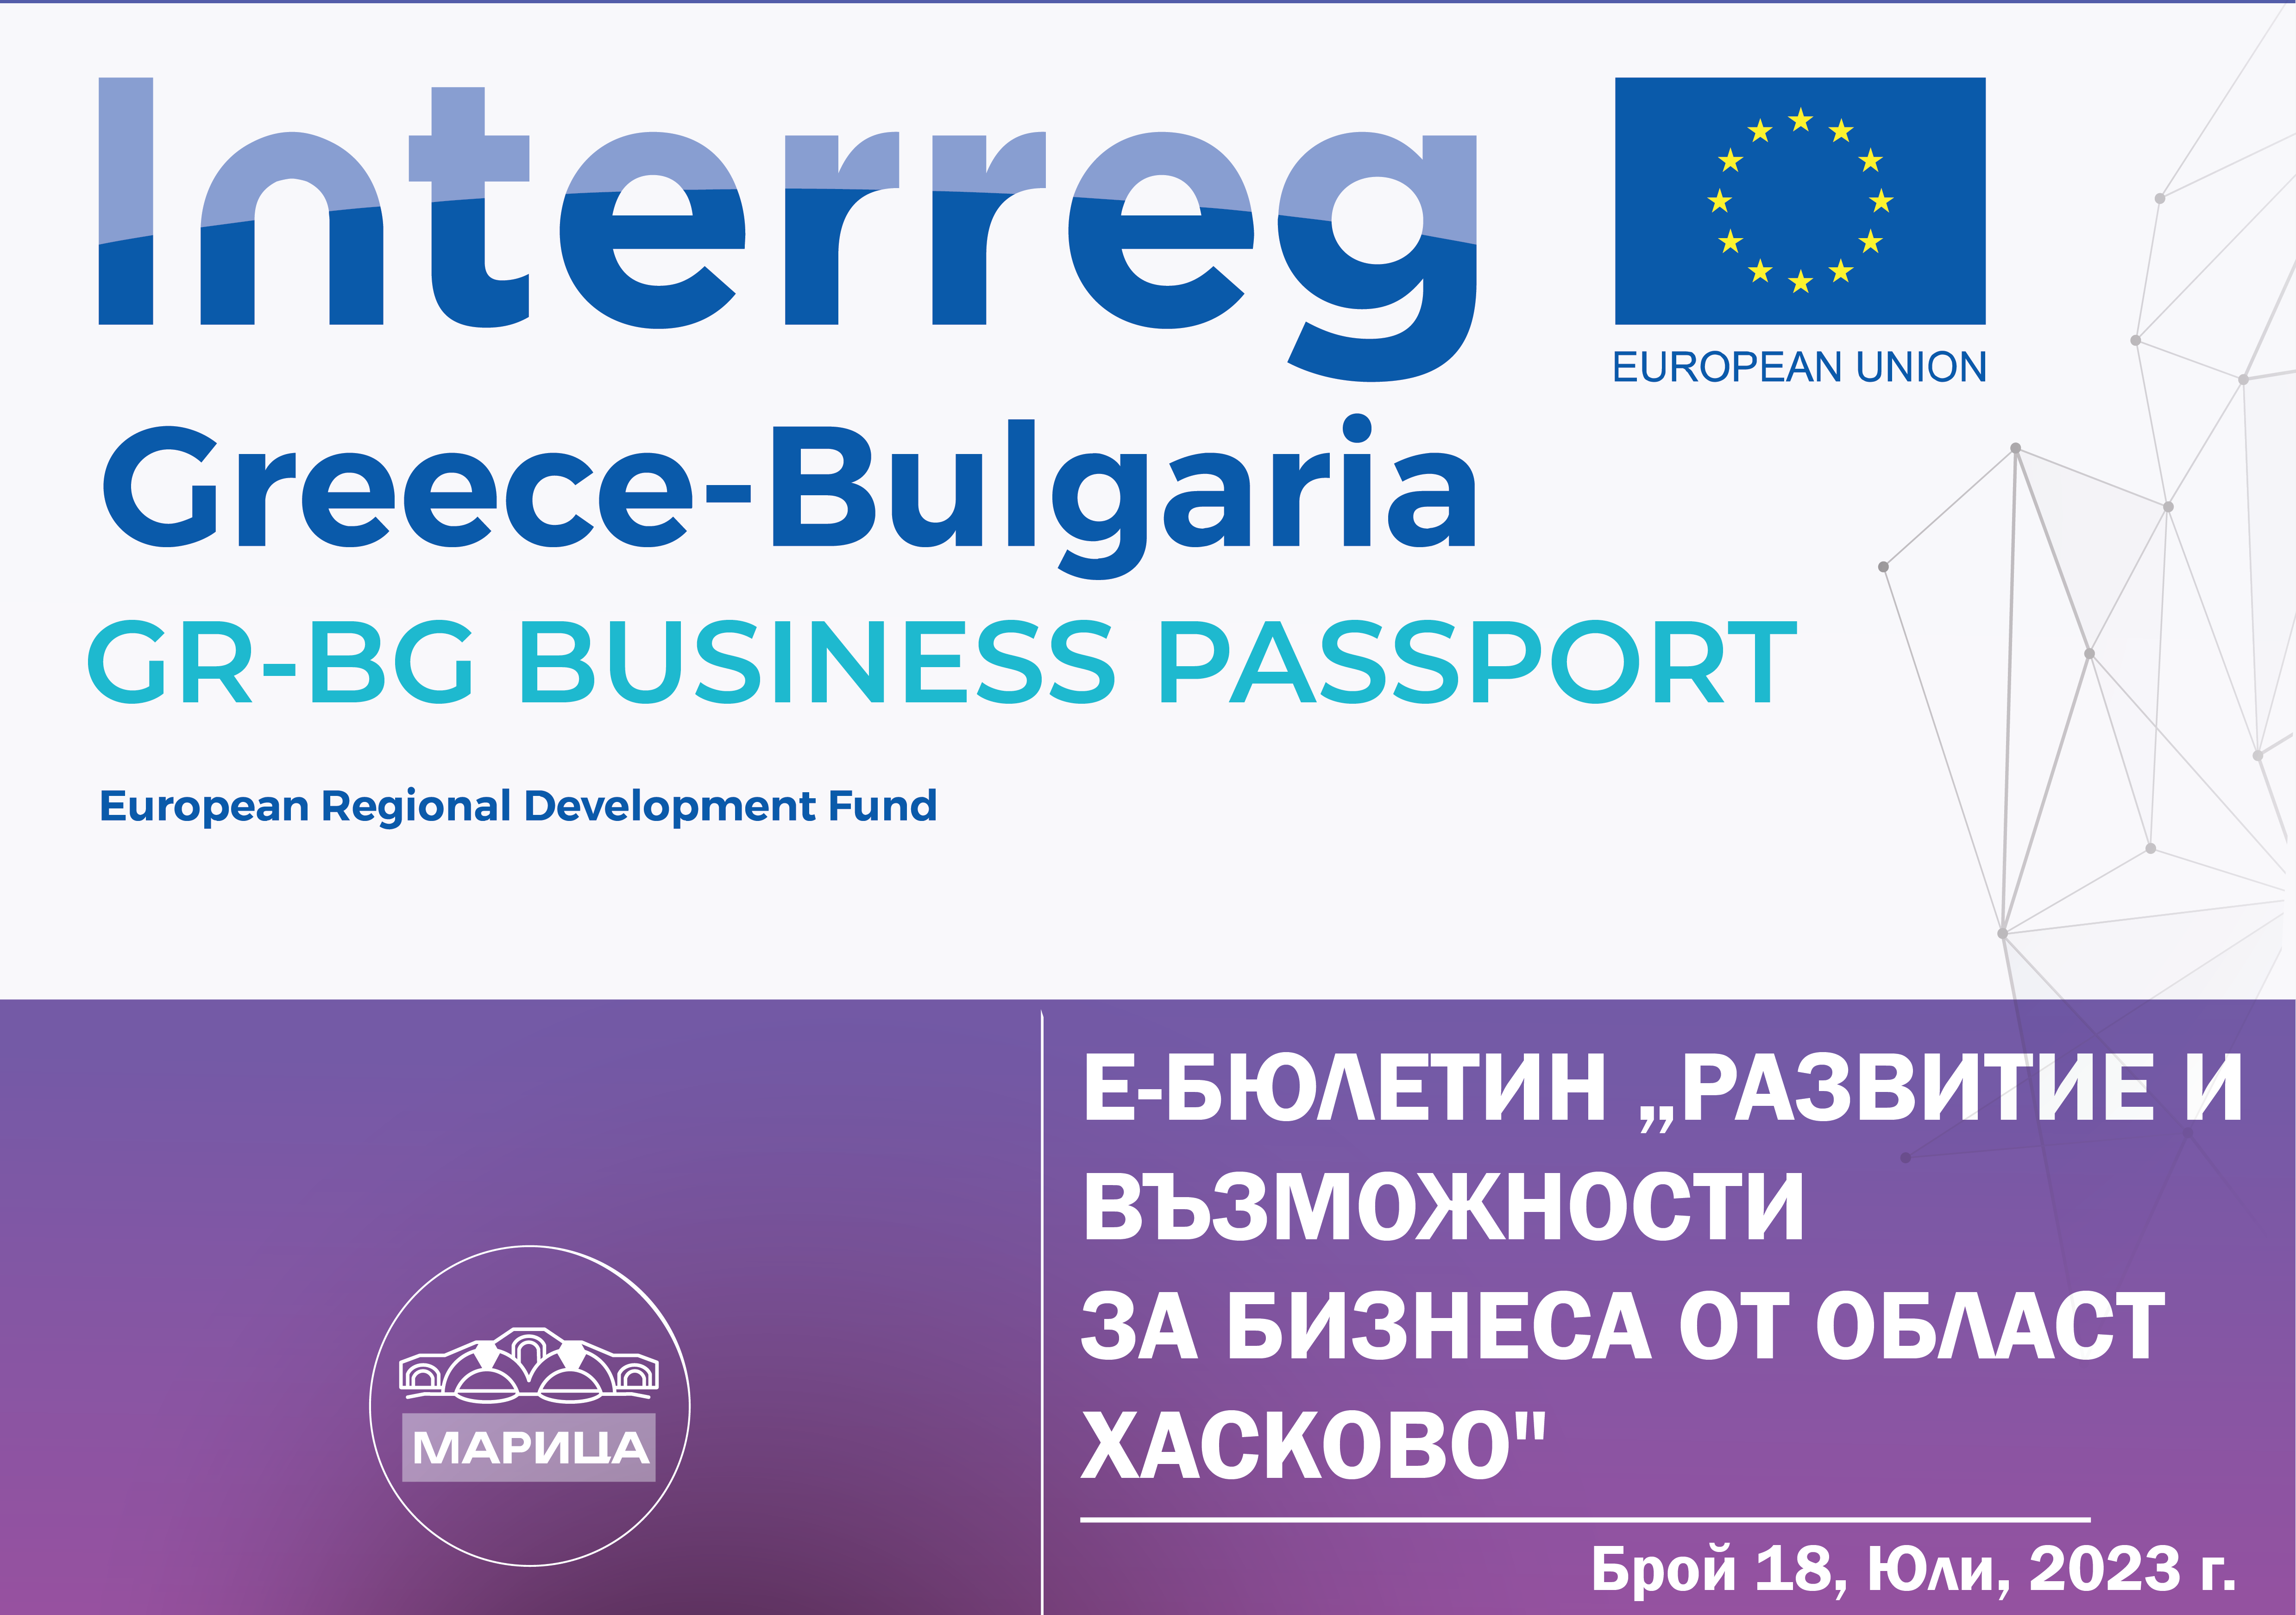 e-newsletter “Development and opportunities for business in the Haskovo region” under a project with the acronym “GR-BG BUSINESS PASSPORT, July, 2023, 18th edition